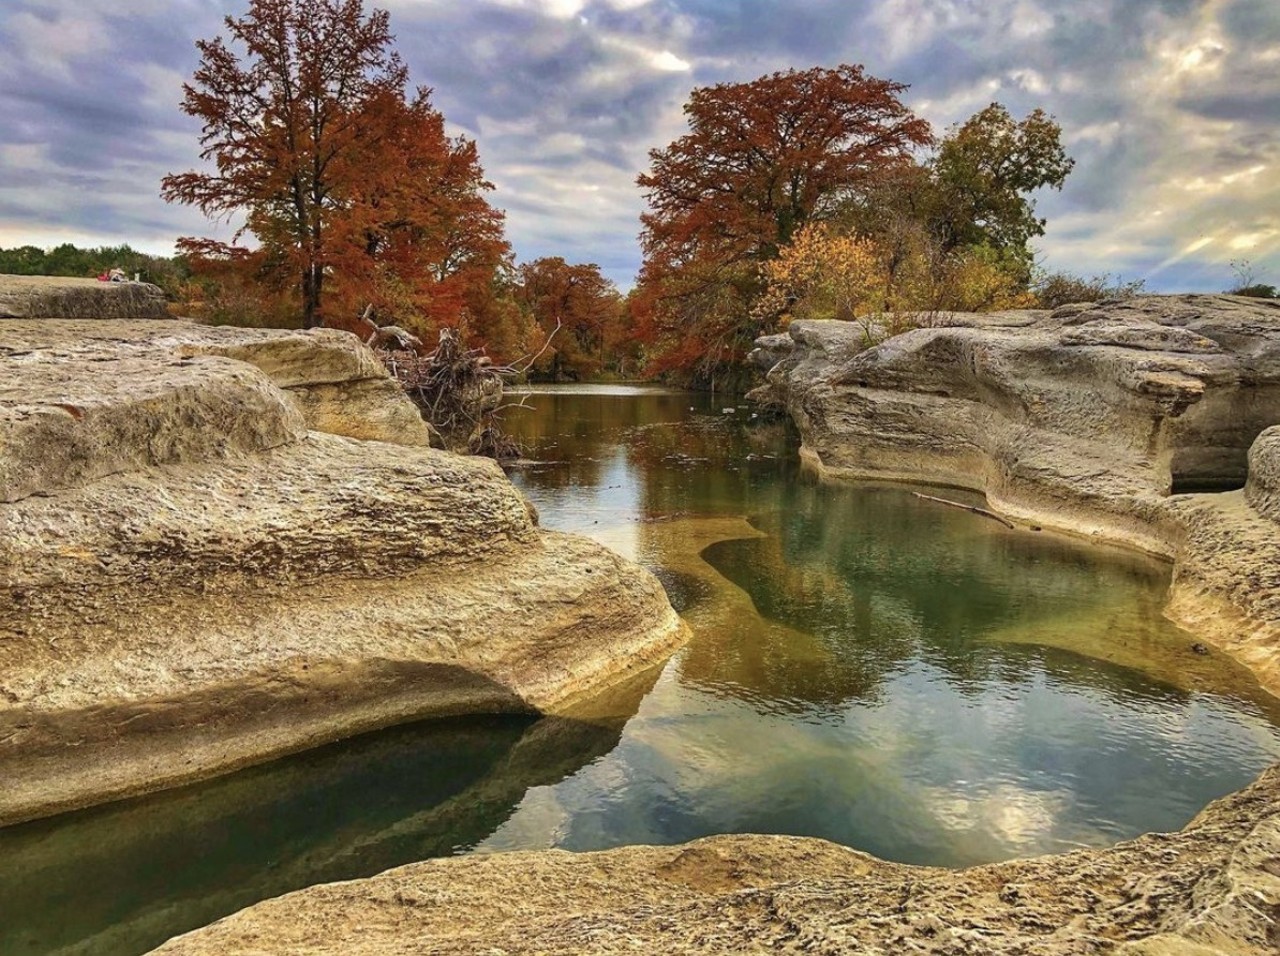 McKinney Falls State Park
5808 McKinney Falls Pkwy, Austin, (512) 243-1643, tpwd.texas.gov
McKinney Falls is a short drive north, located within Austin's city limits at the confluence of Onion Creek and Williamson Creek. This spot is truly an escape from city life without being out in the sticks. There’s a hard-surface trail that’s perfect for wheels, or you can opt for a traditional, rugged hike. Though you likely won’t want to go for a swim, the beauty of the waterfalls are worth checking out, too.
Photo via Instagram / thehikinghussy